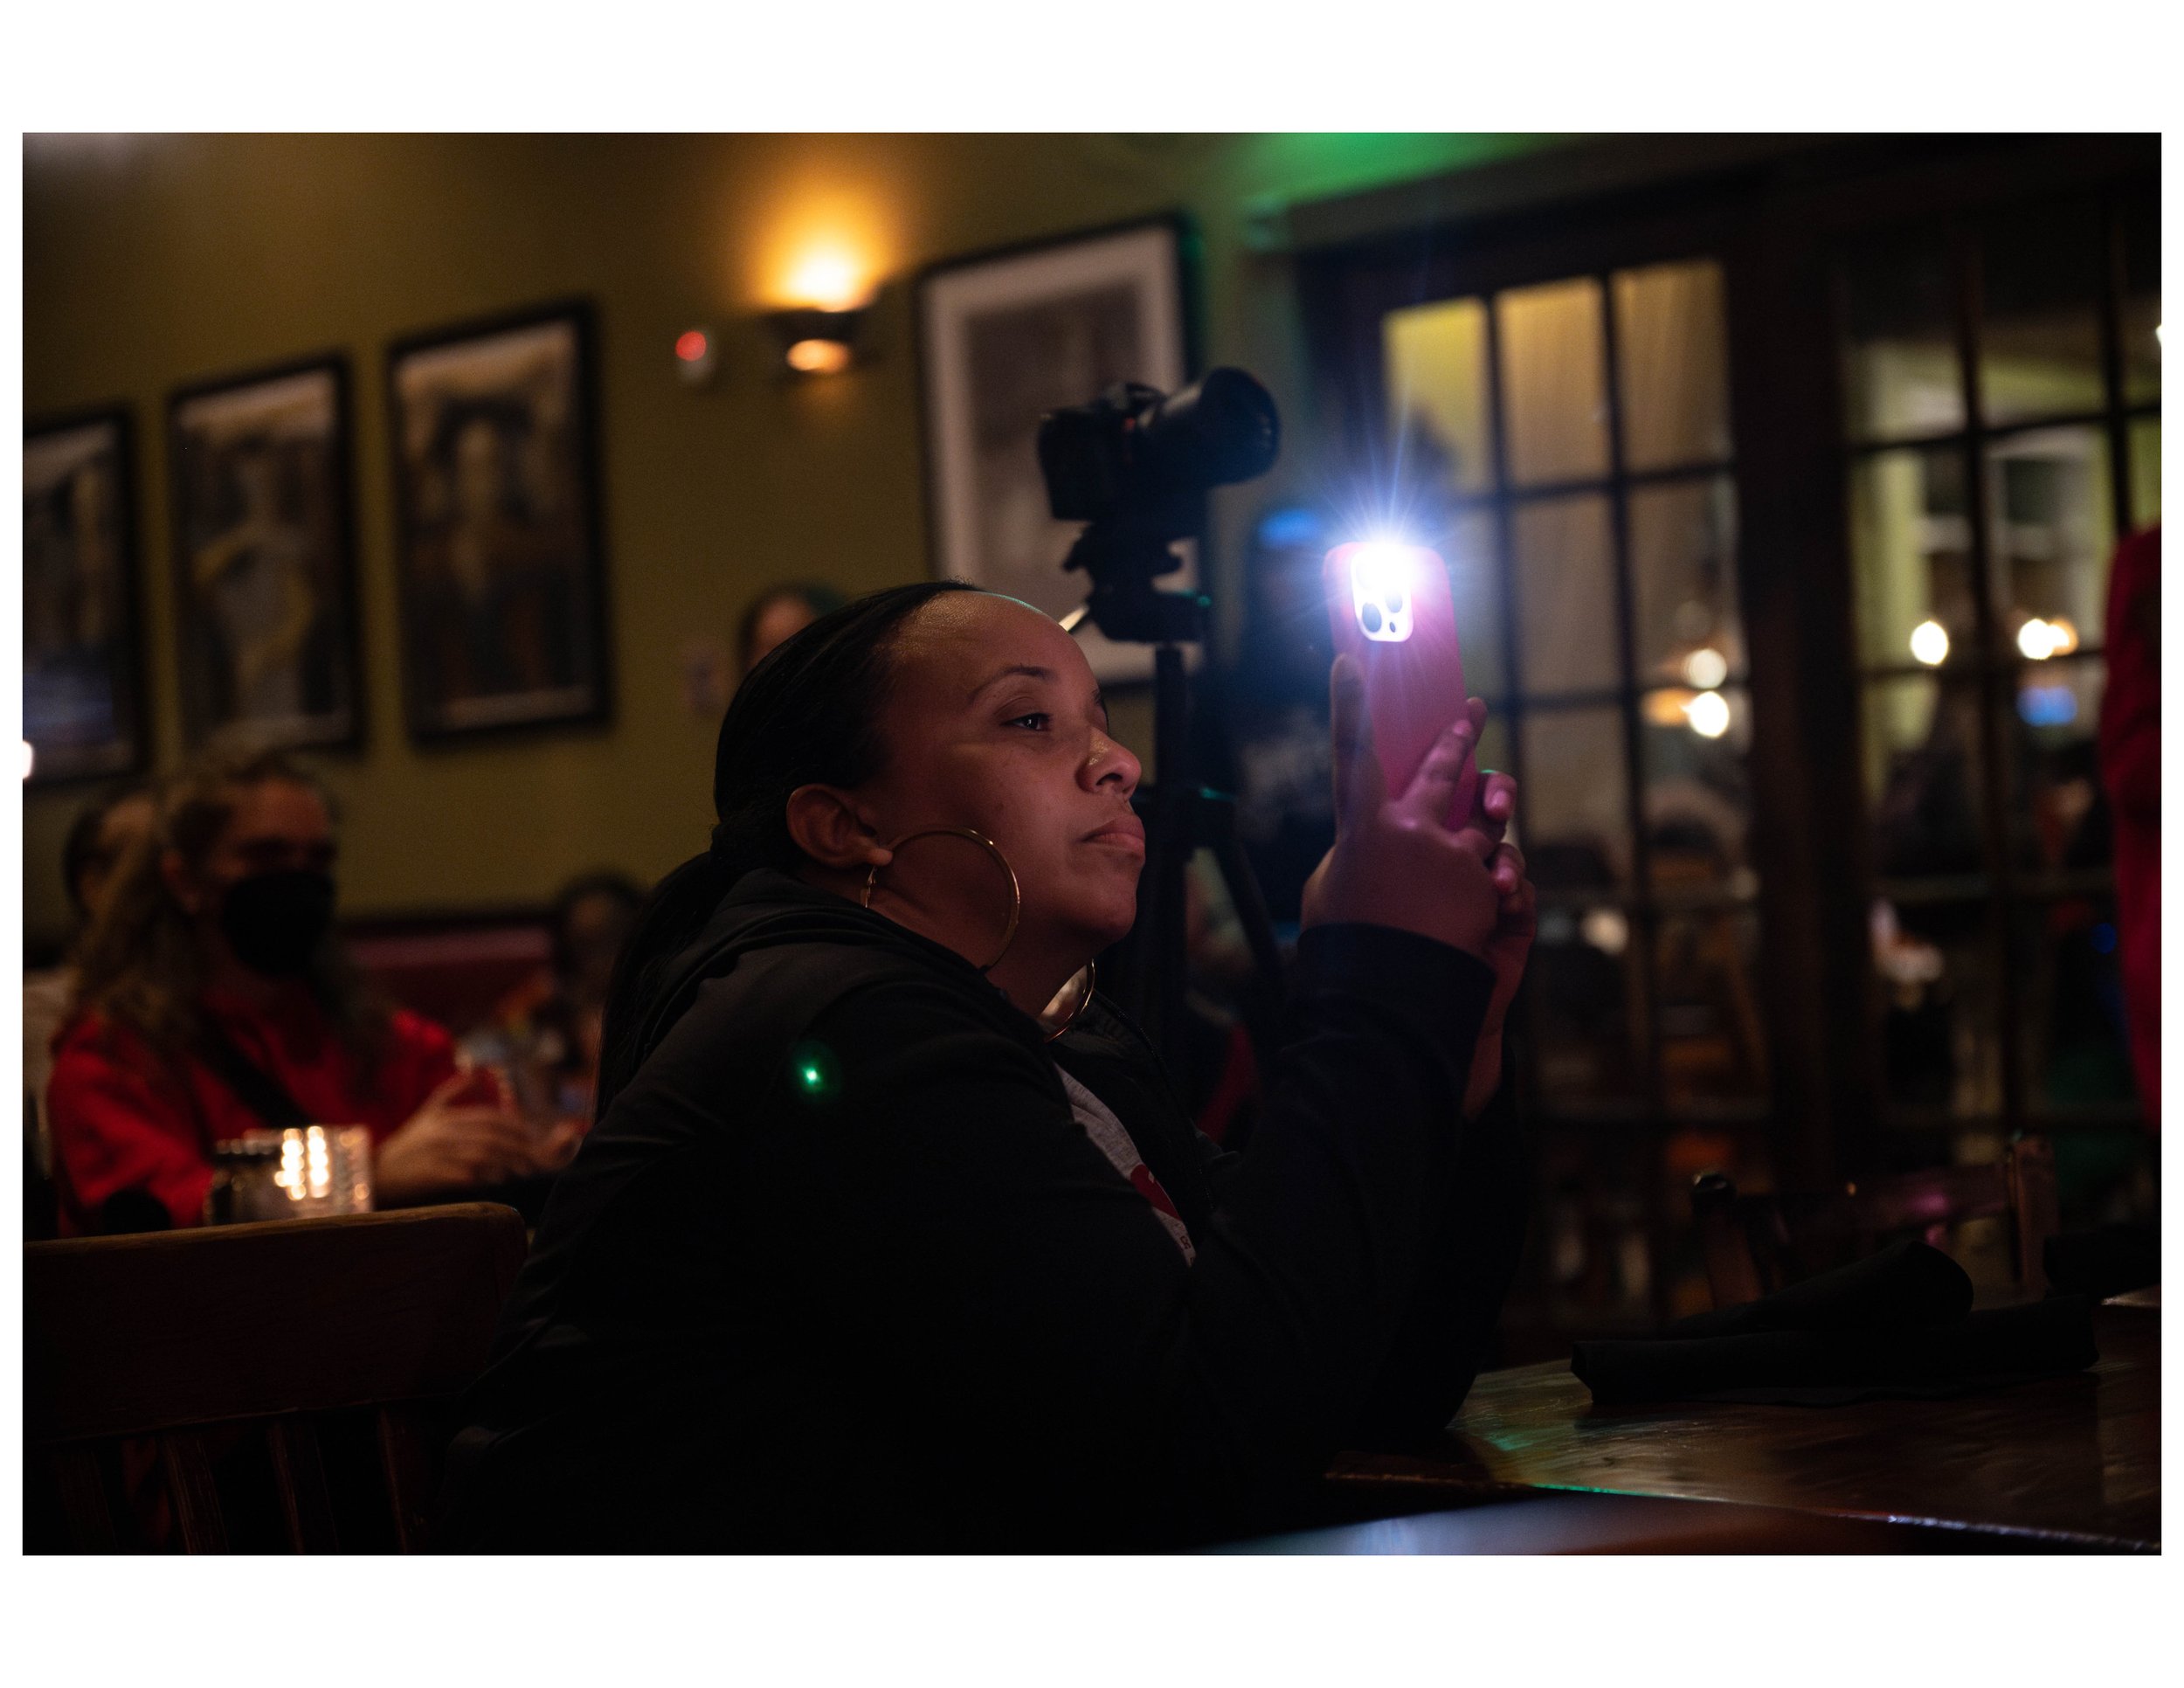   Parent captures photo at an open mic event hosted by Words Beats &amp; Life Inc. at Busboys and Poets in Washington, DC. Photographer/Victoria Ford  